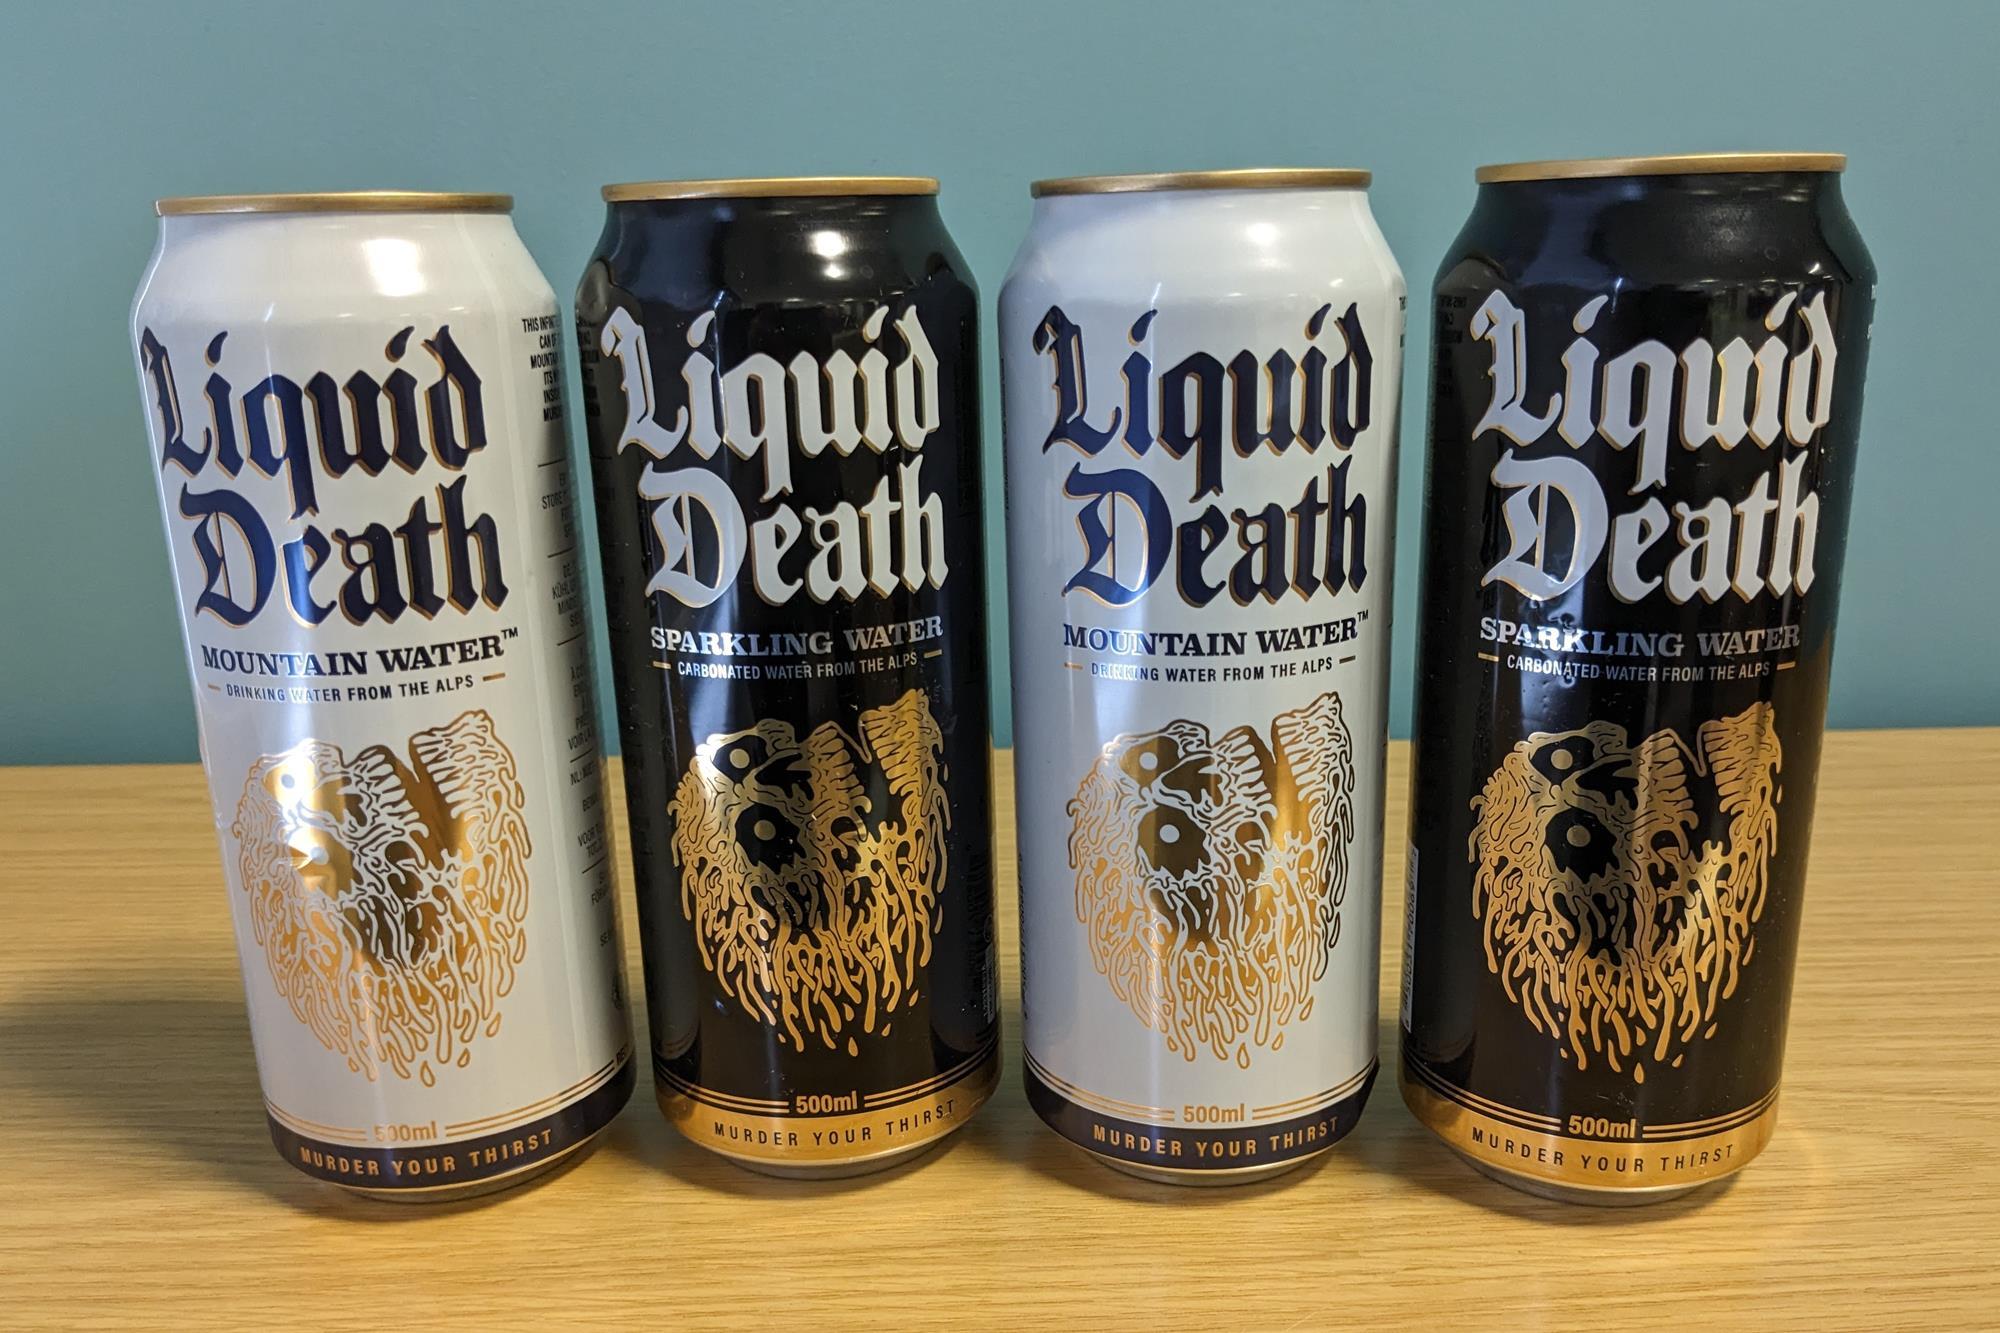 Canned water brand Liquid Death makes UK debut, News